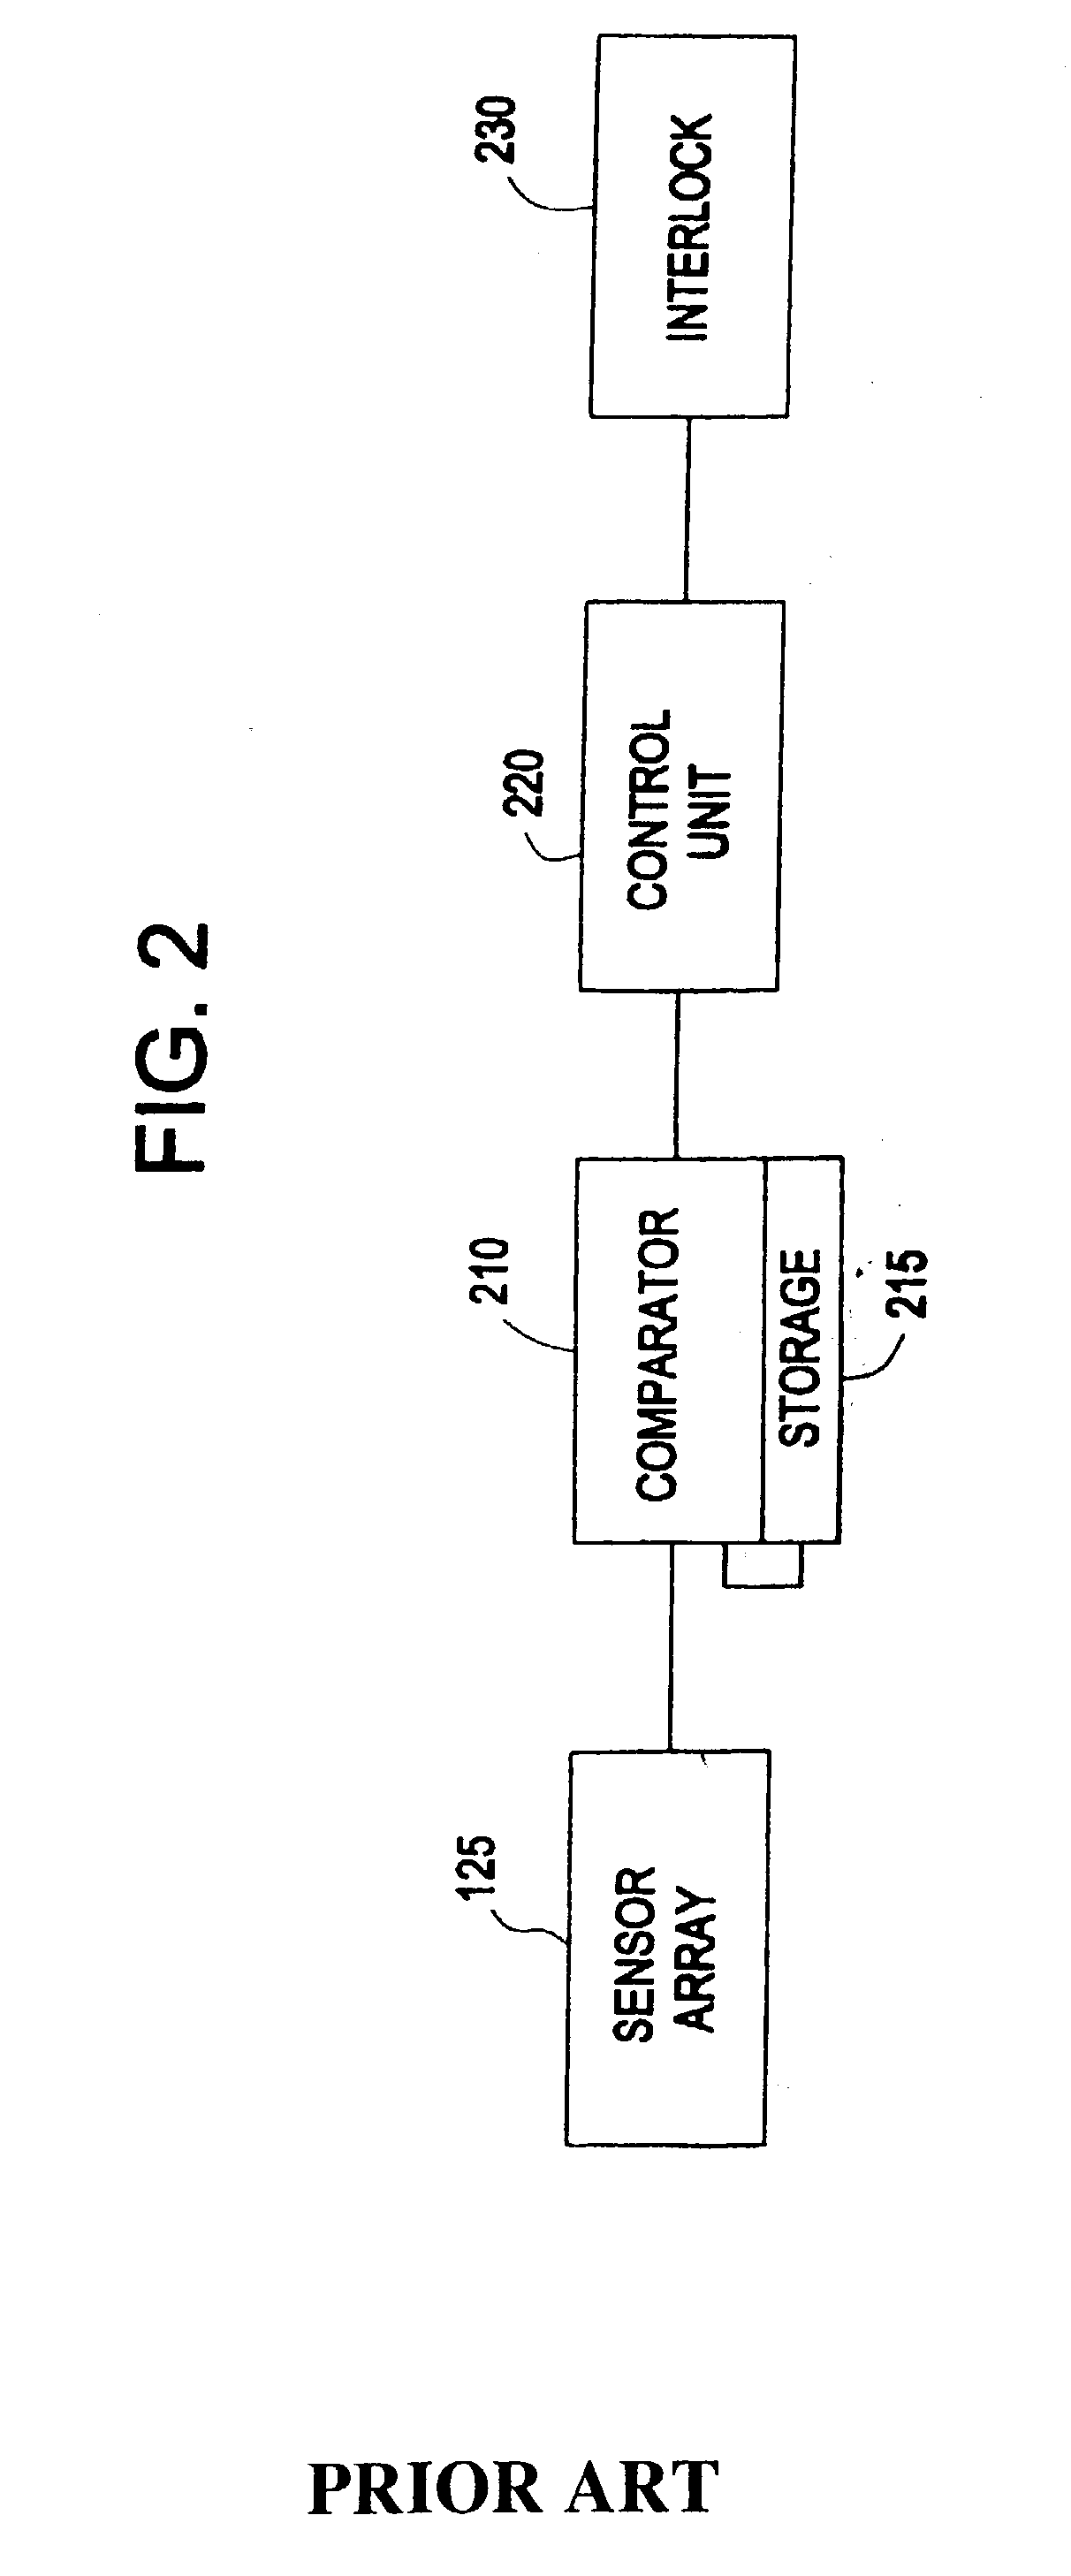 Sensor array for unauthorized user prevention device